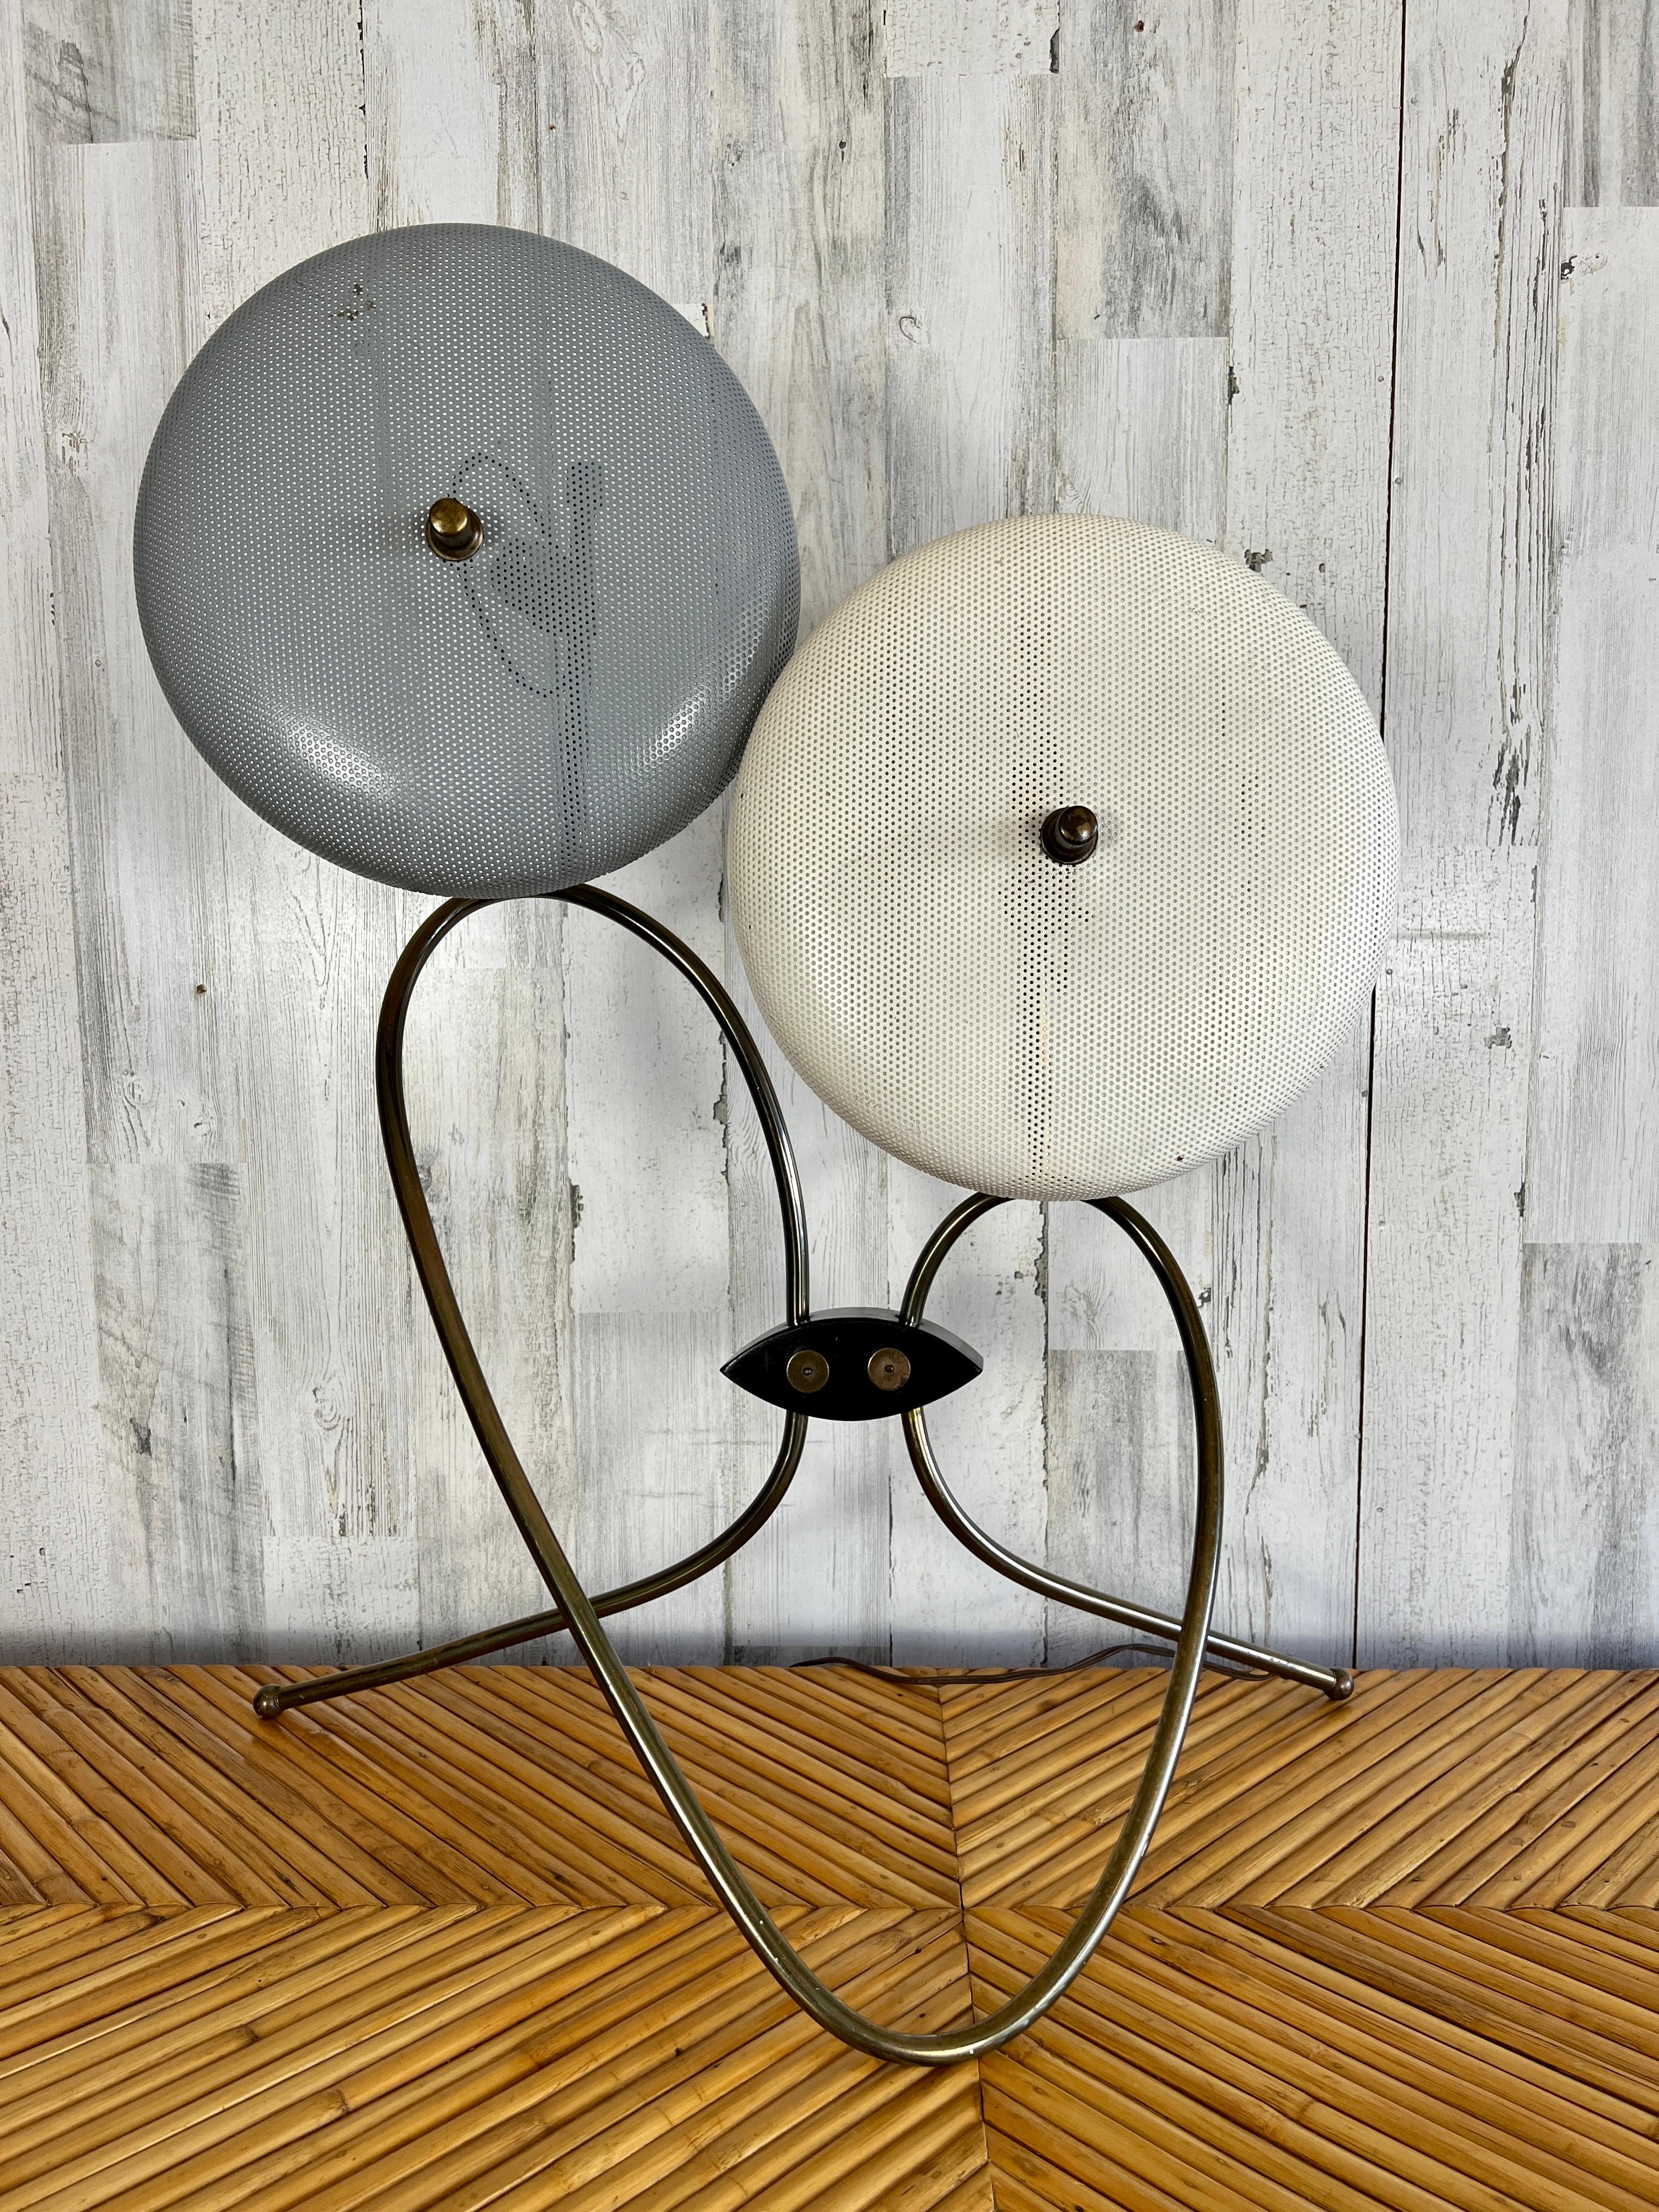 Perforated metal shades on this twisted brass table lamp base.